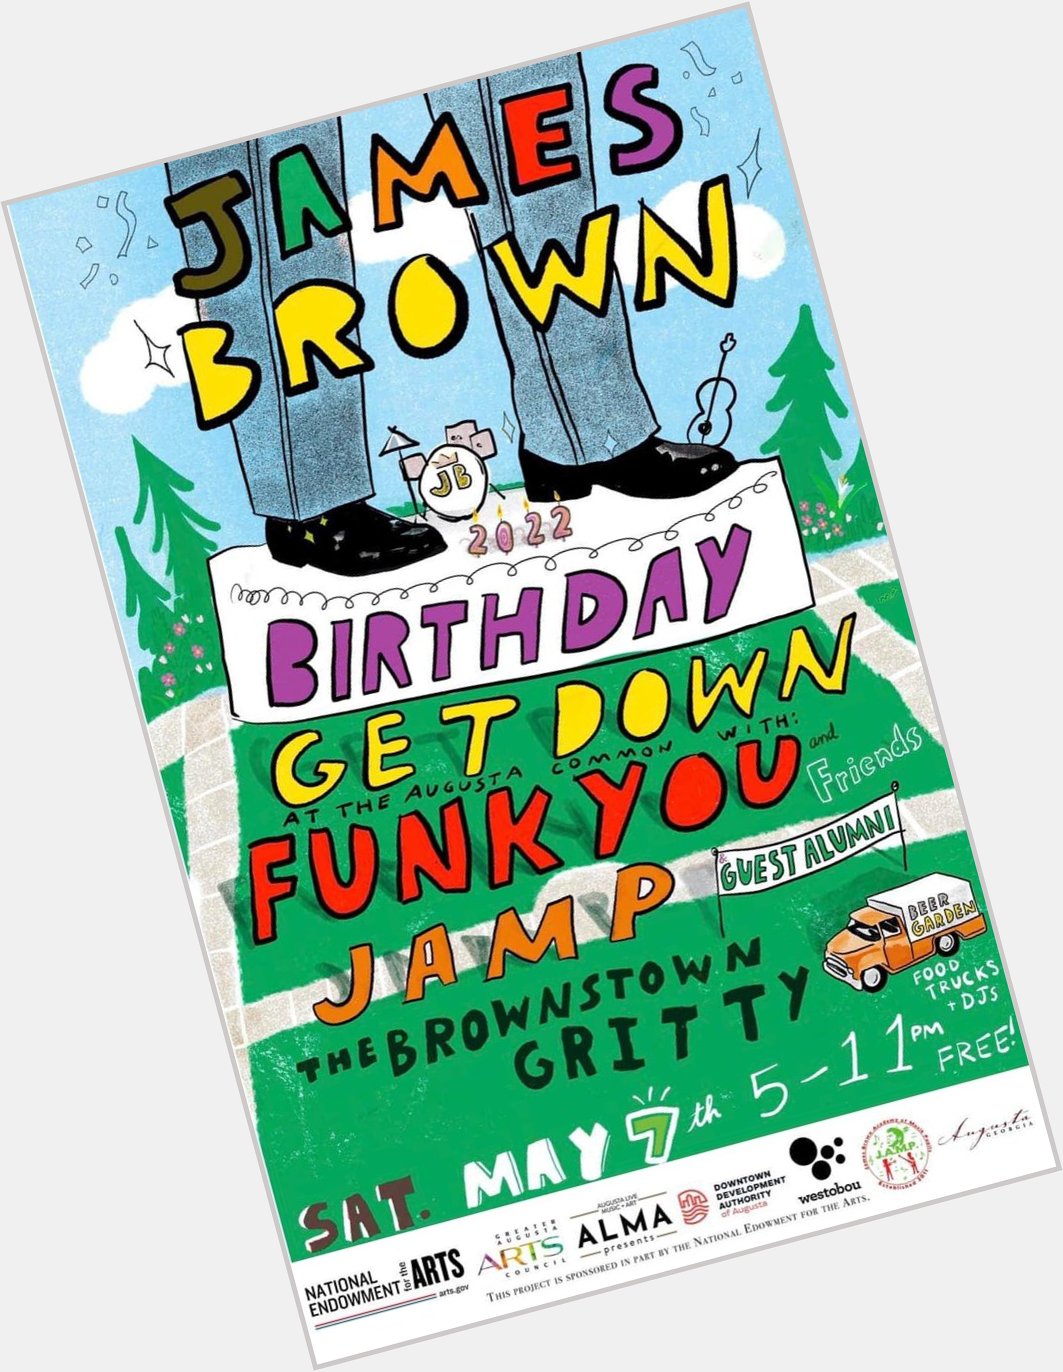 Happy Birthday To My Favorite Musical Performer. James Brown 